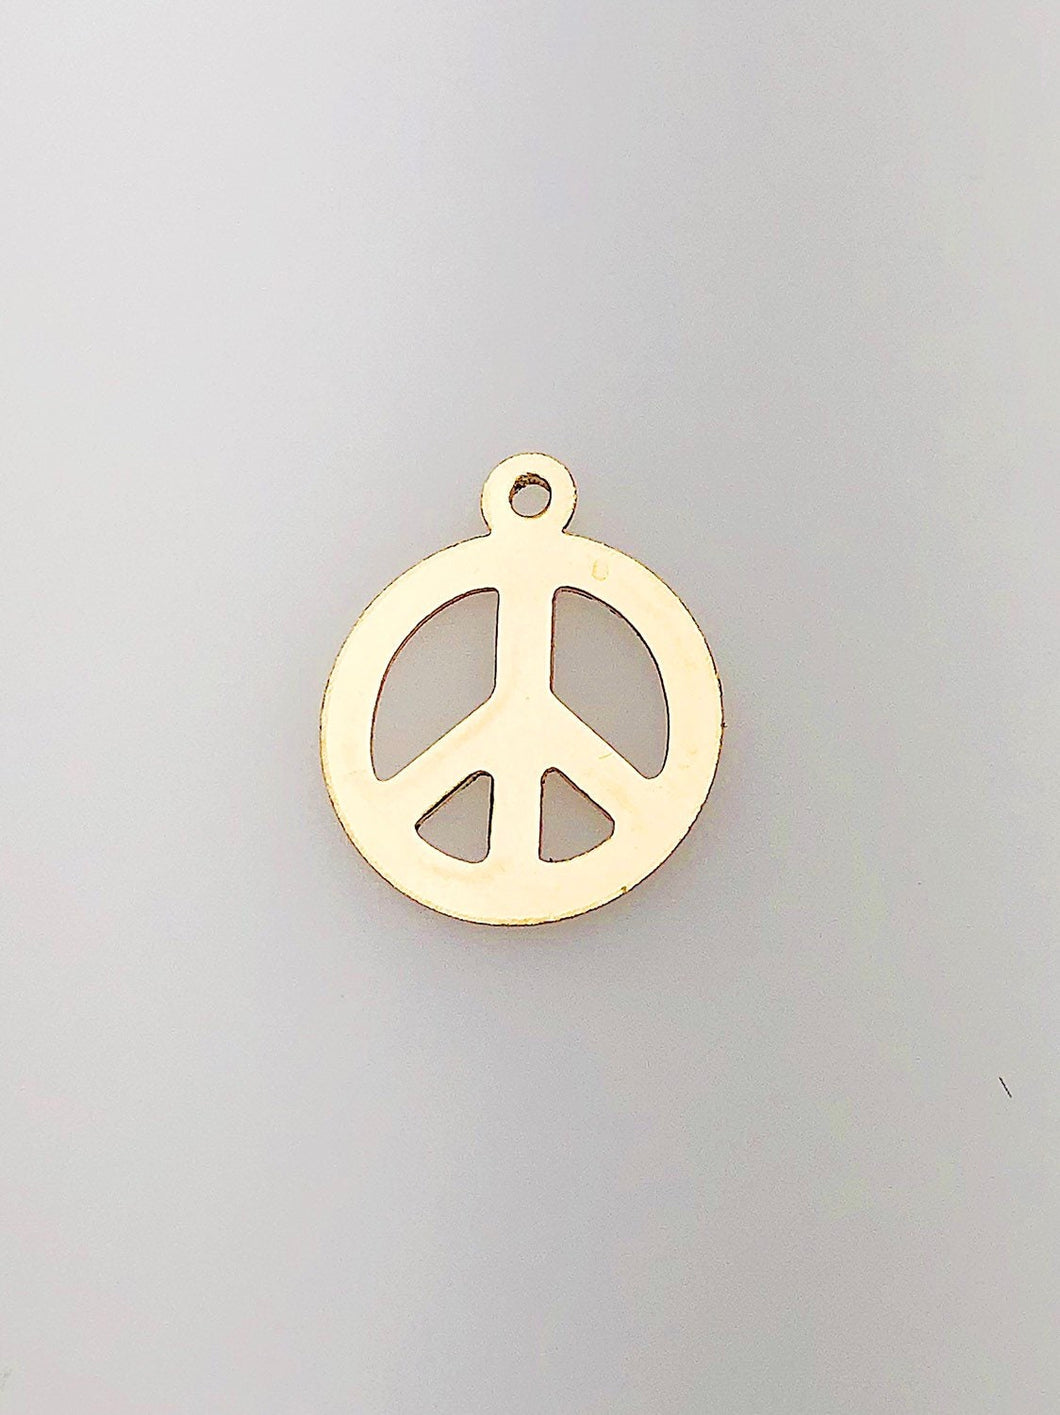 14K Gold Fill Peace Sign Charm w/ Ring, 11.3mm, Made in USA - 1351